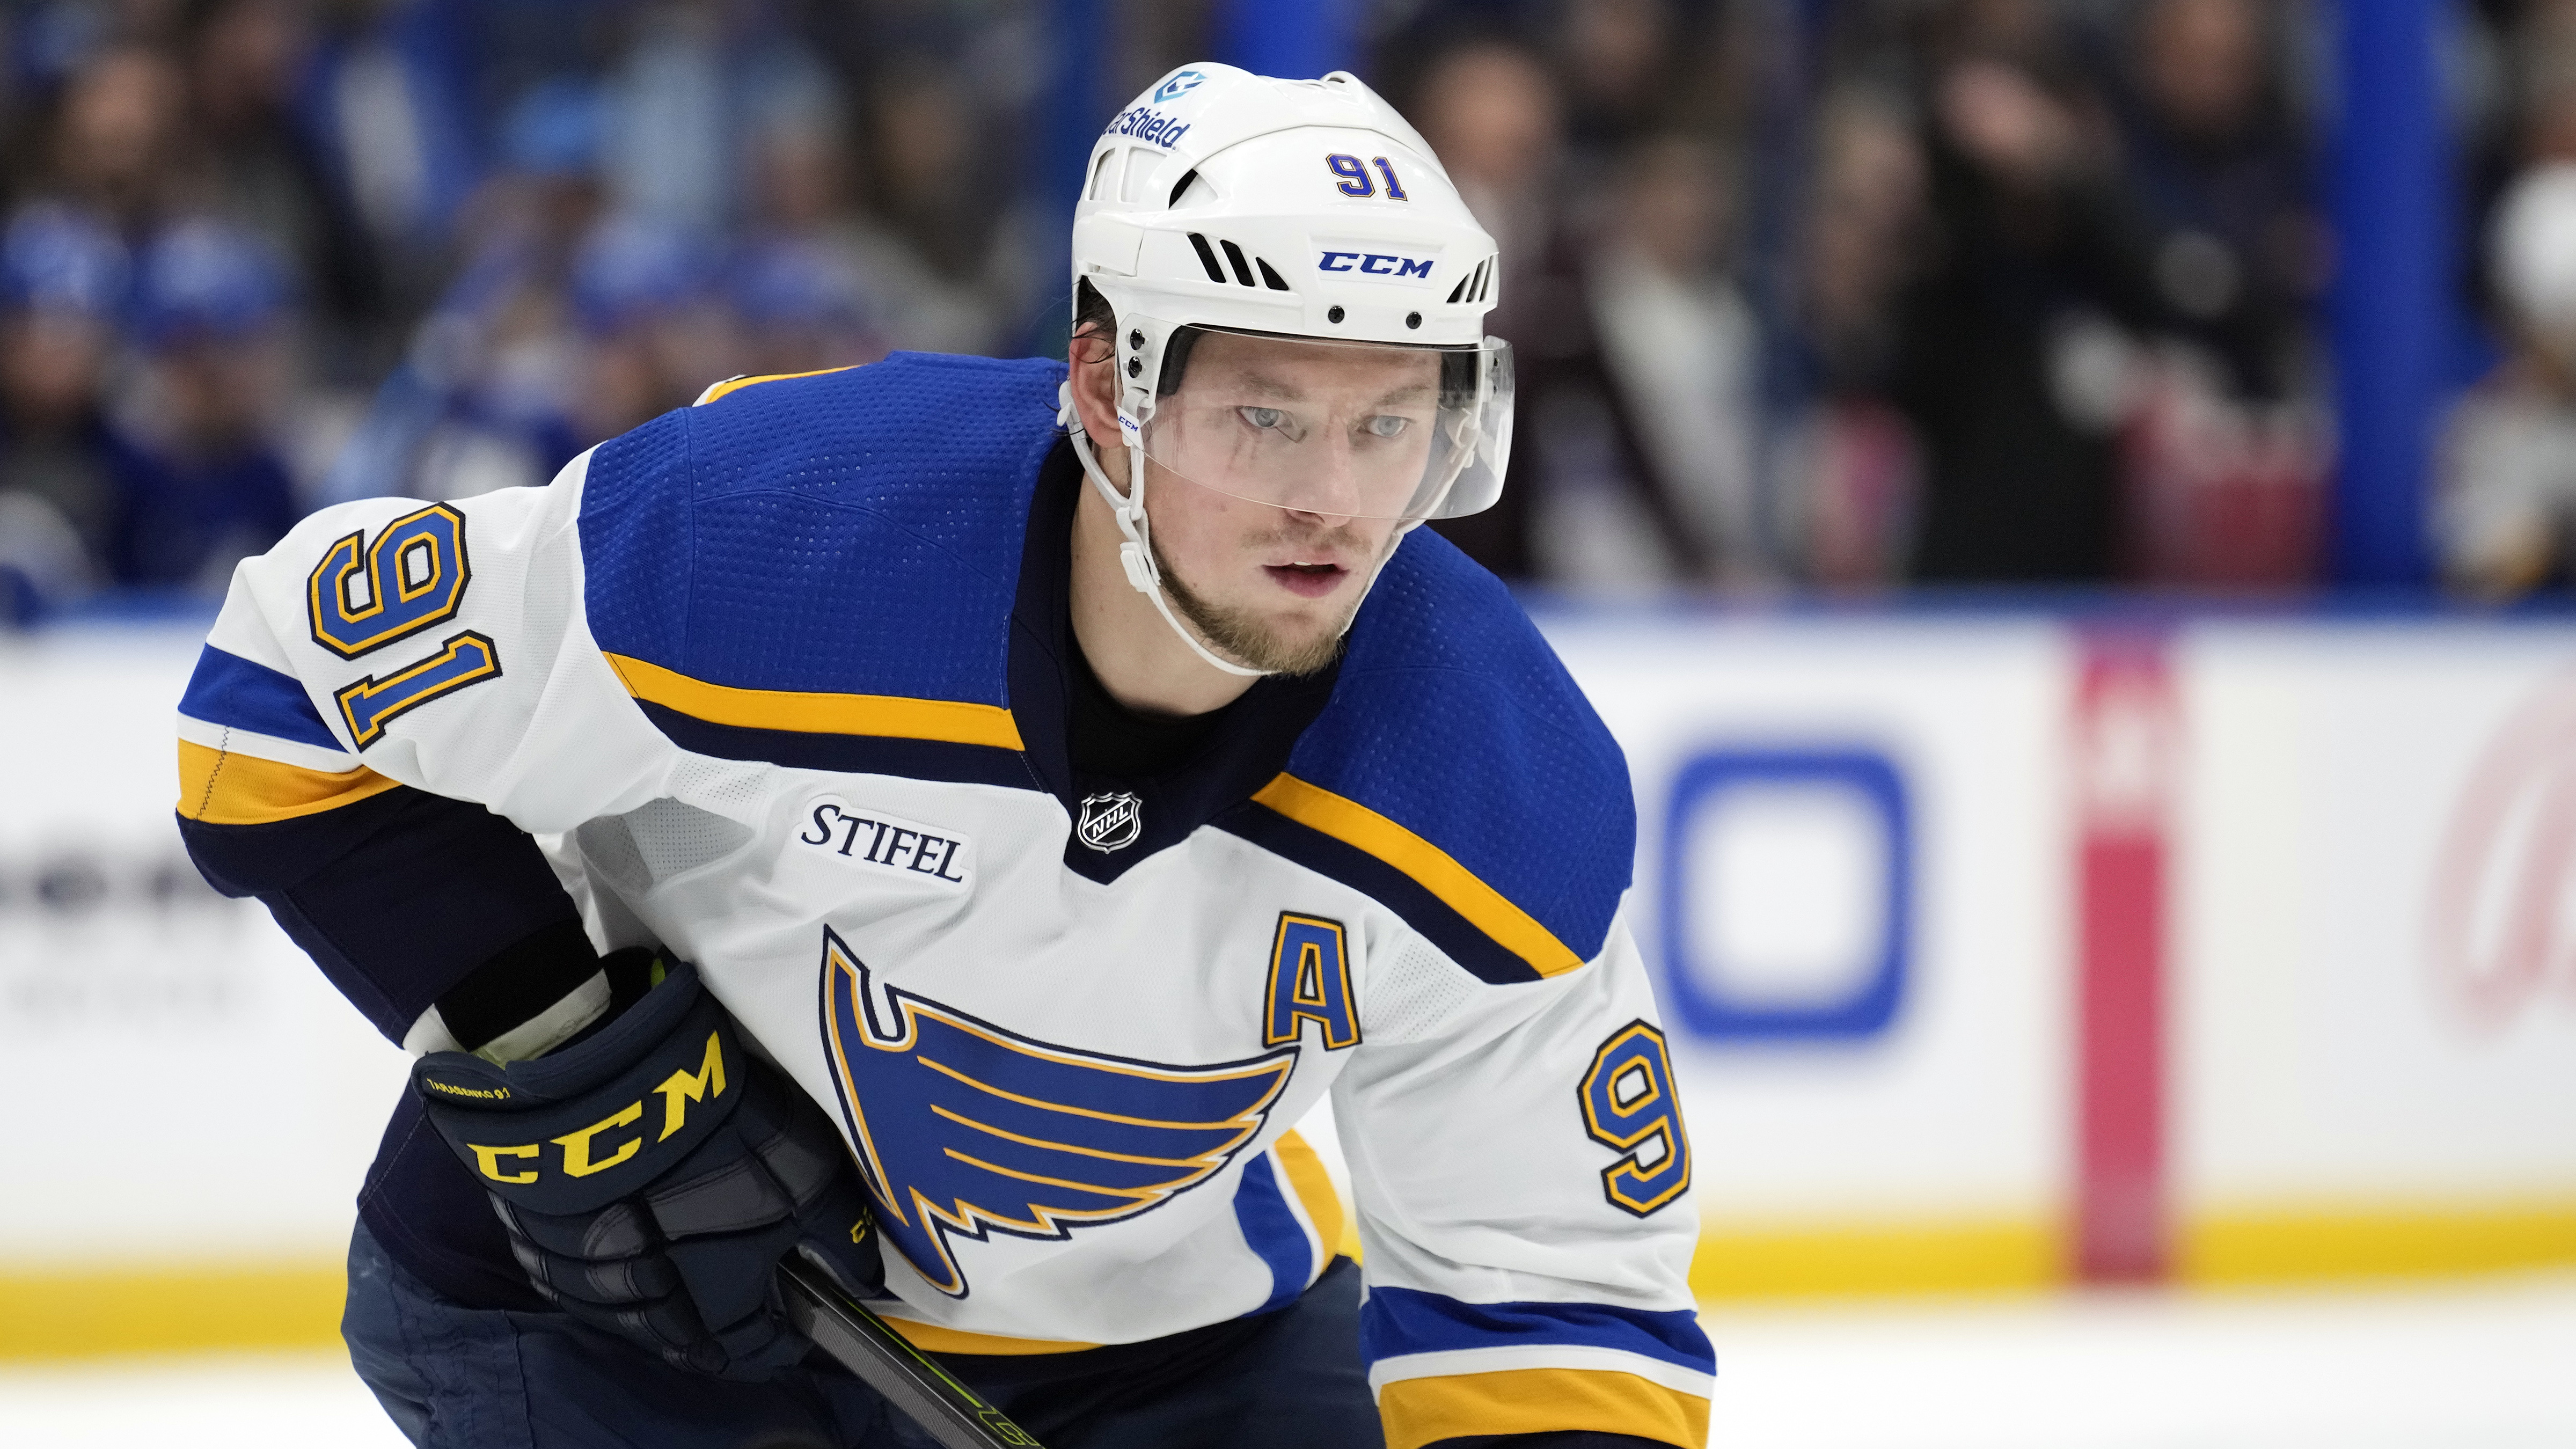 Vladimir Tarasenko rejected contract offers from the #Panthers